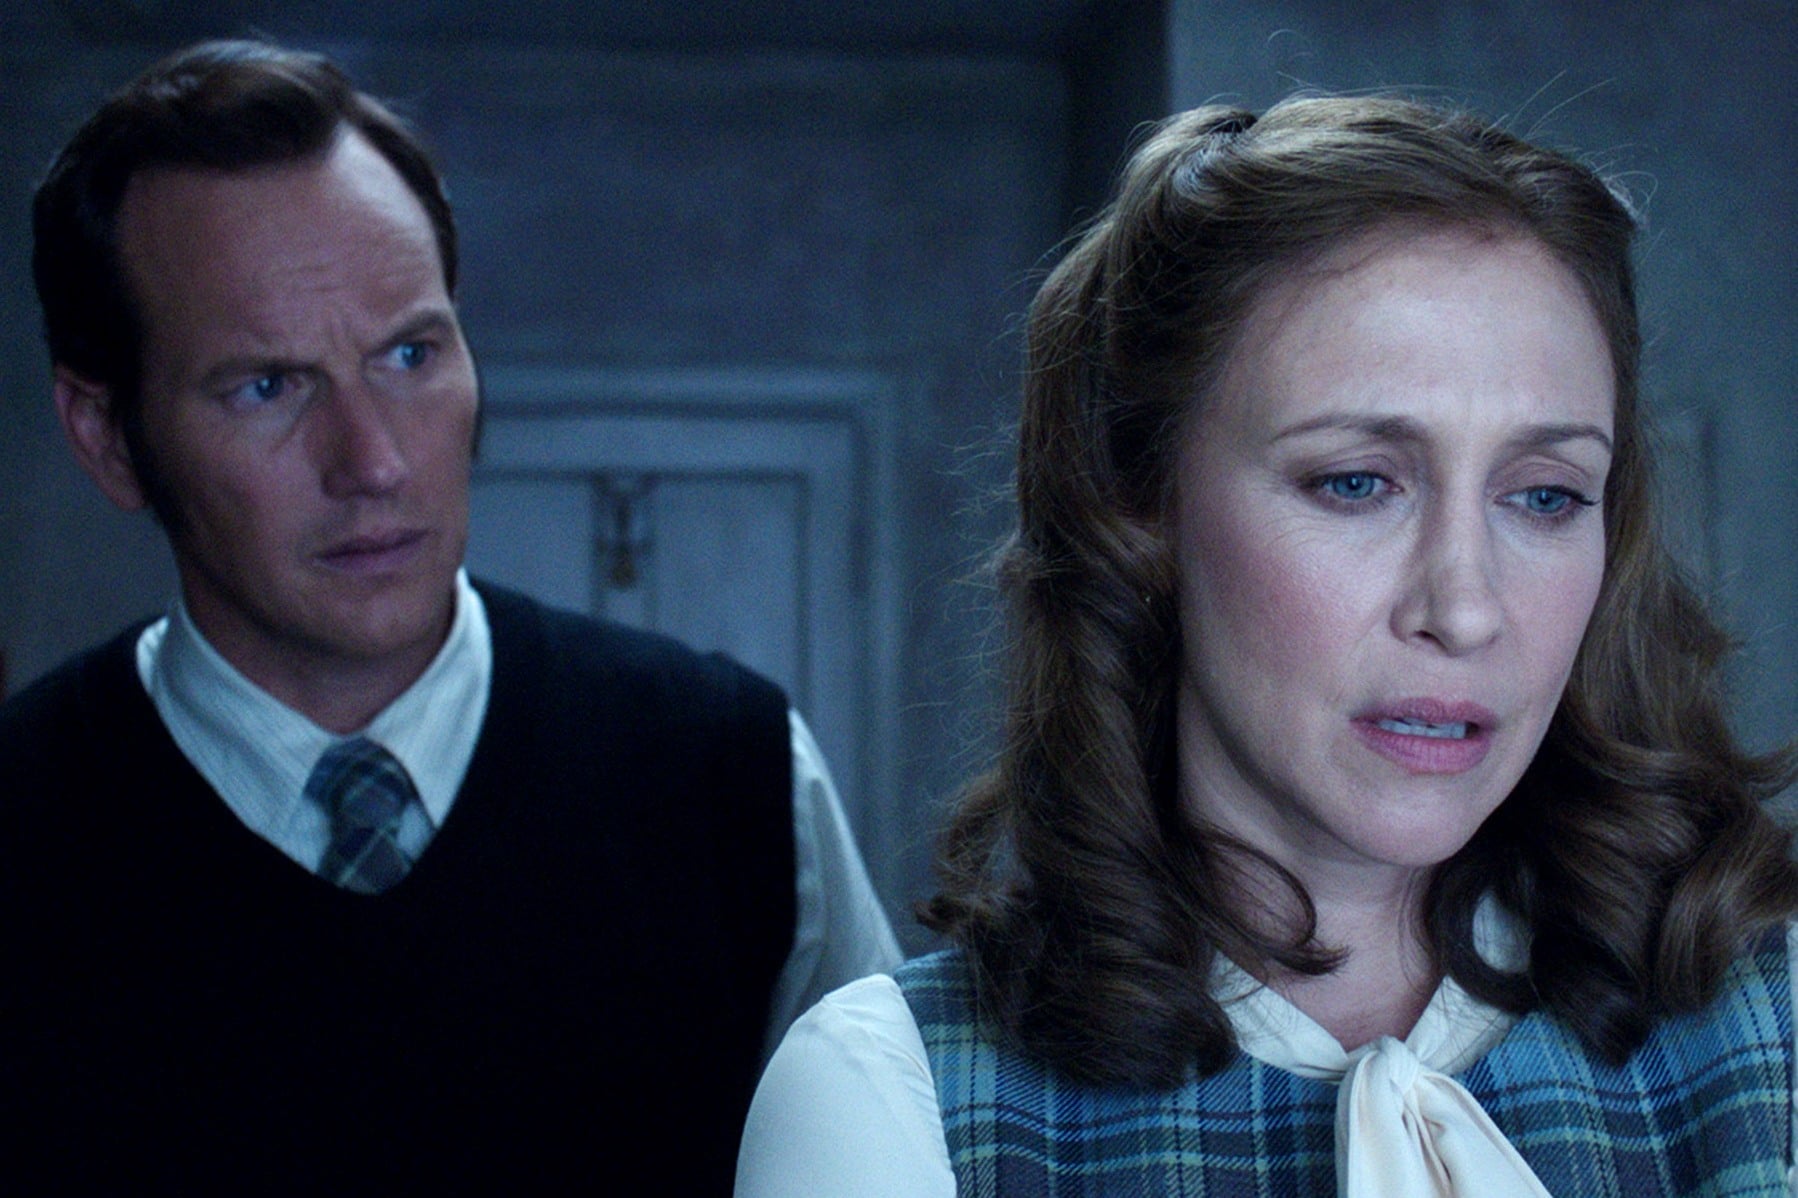 Patrick Wilson and Vera Farmiga star in a scene from the movie The Conjuring 2.